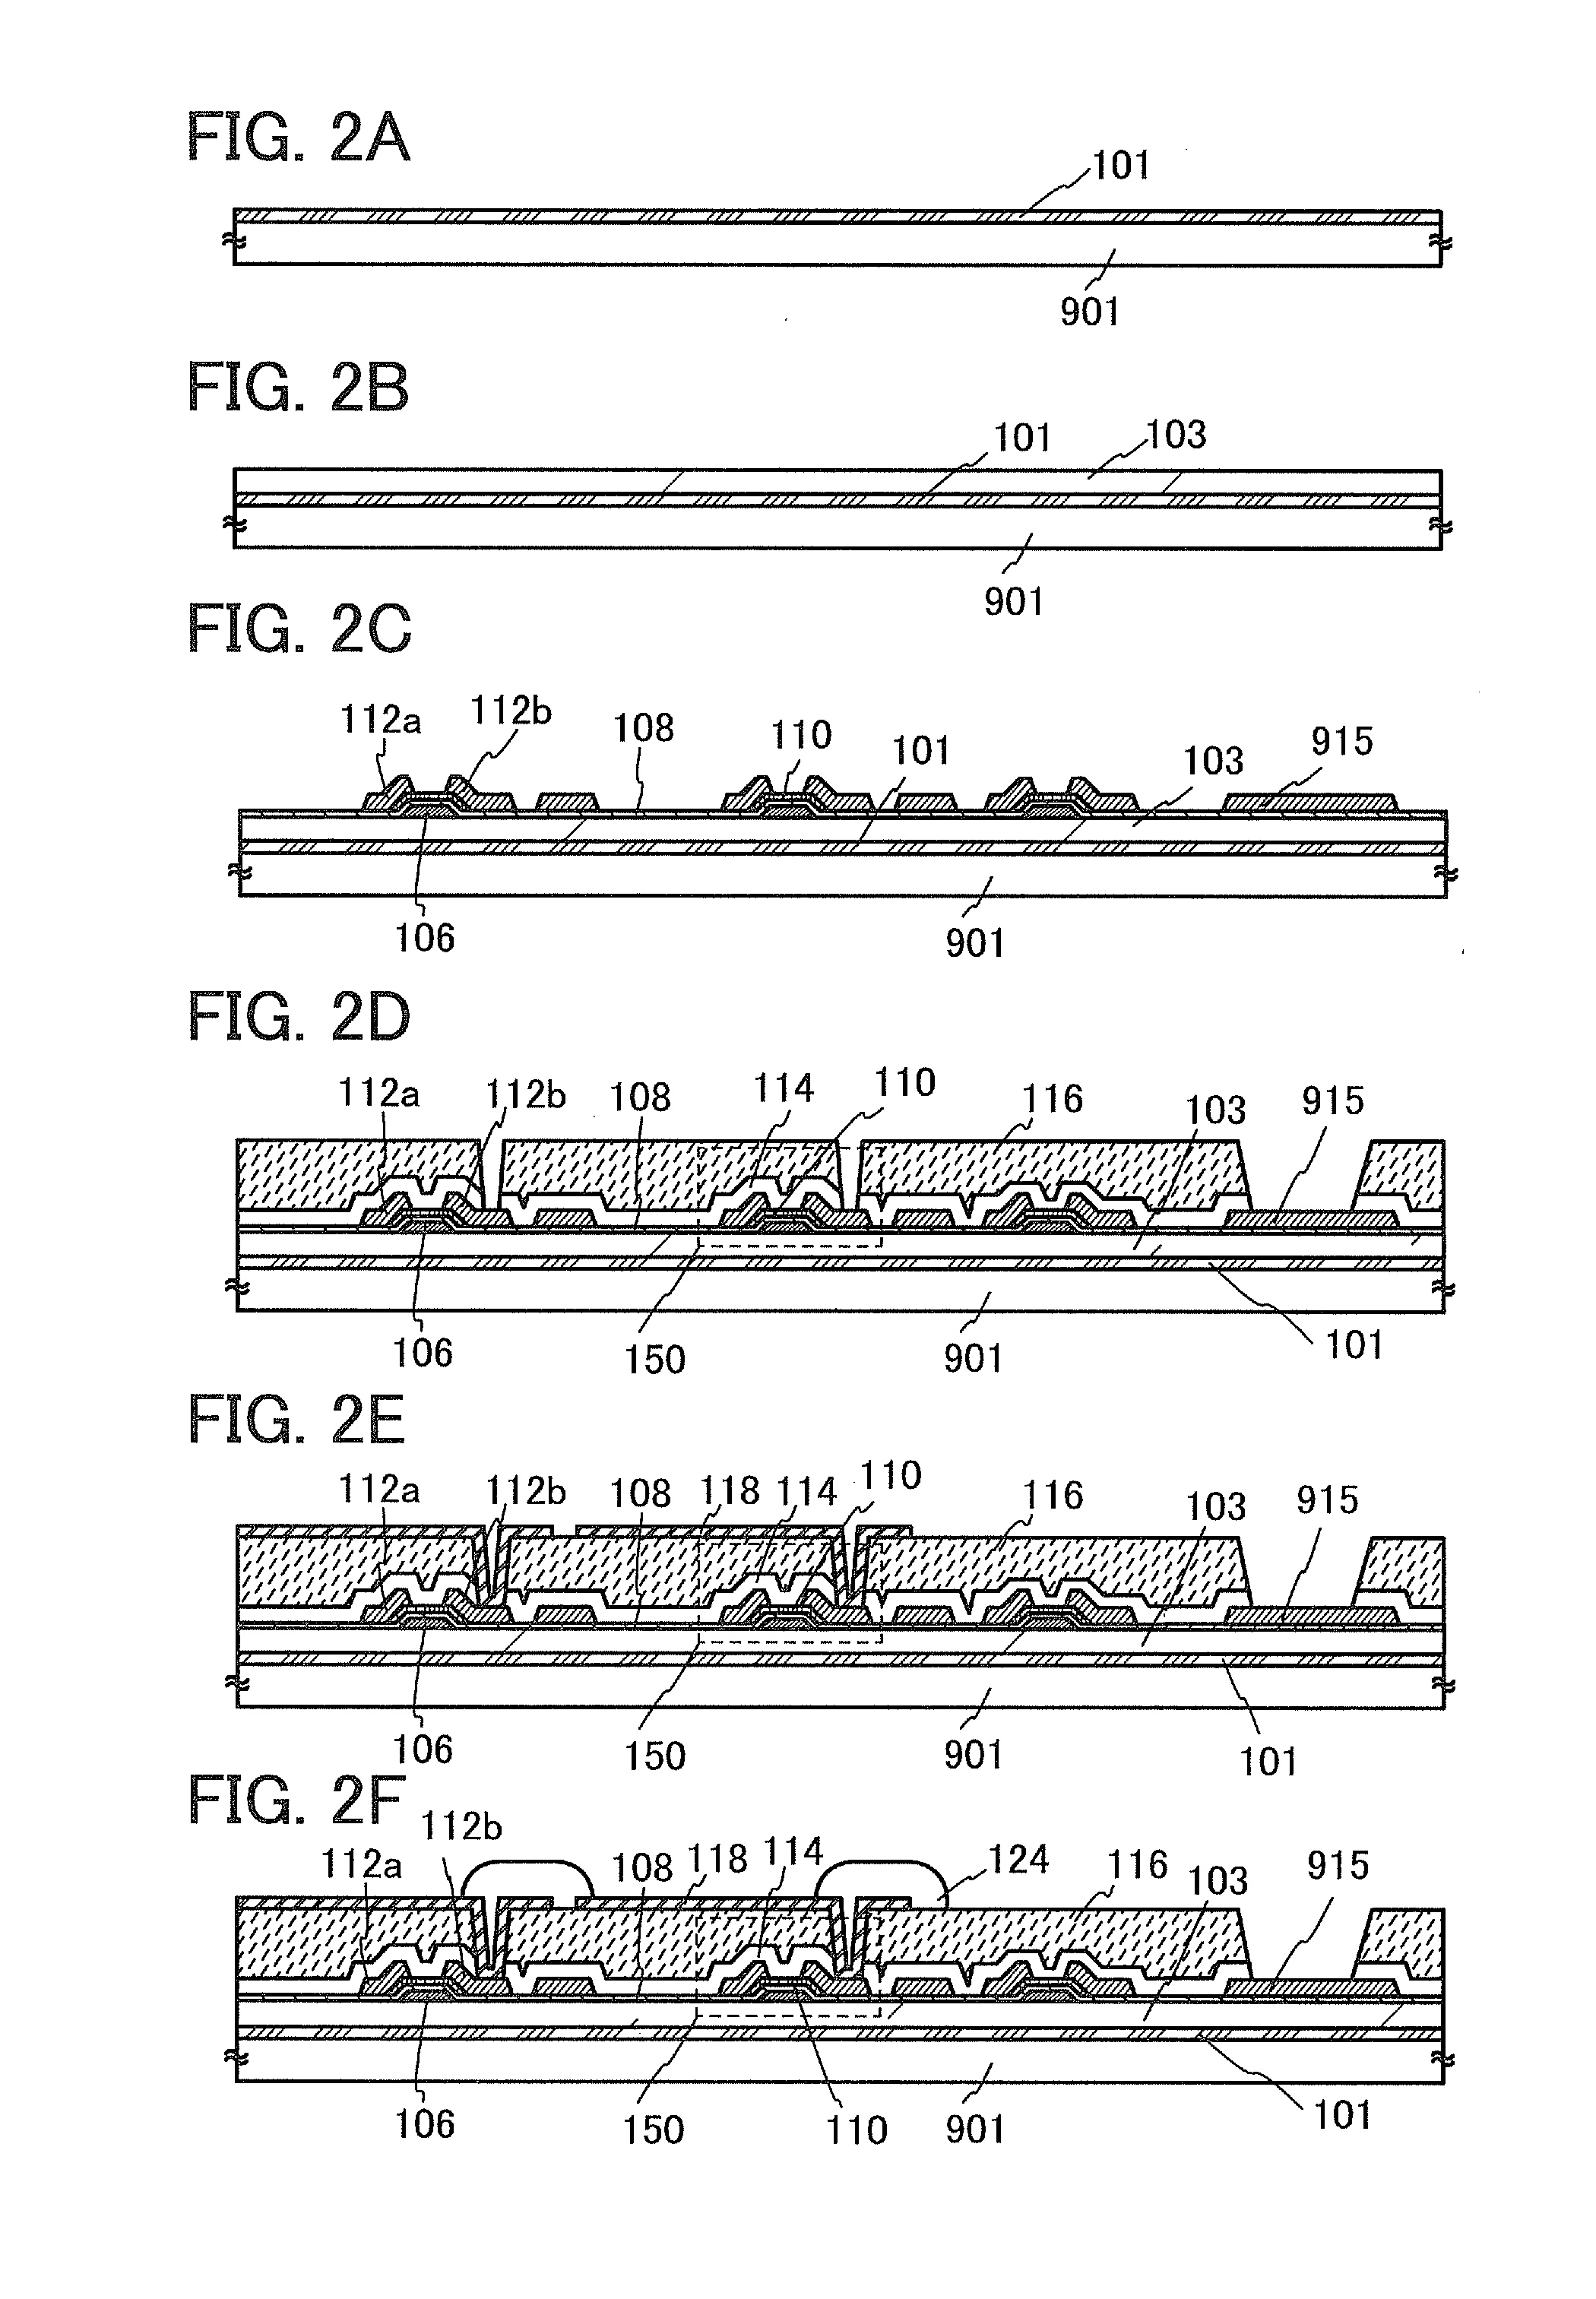 Light-emitting device and method for fabricating the same